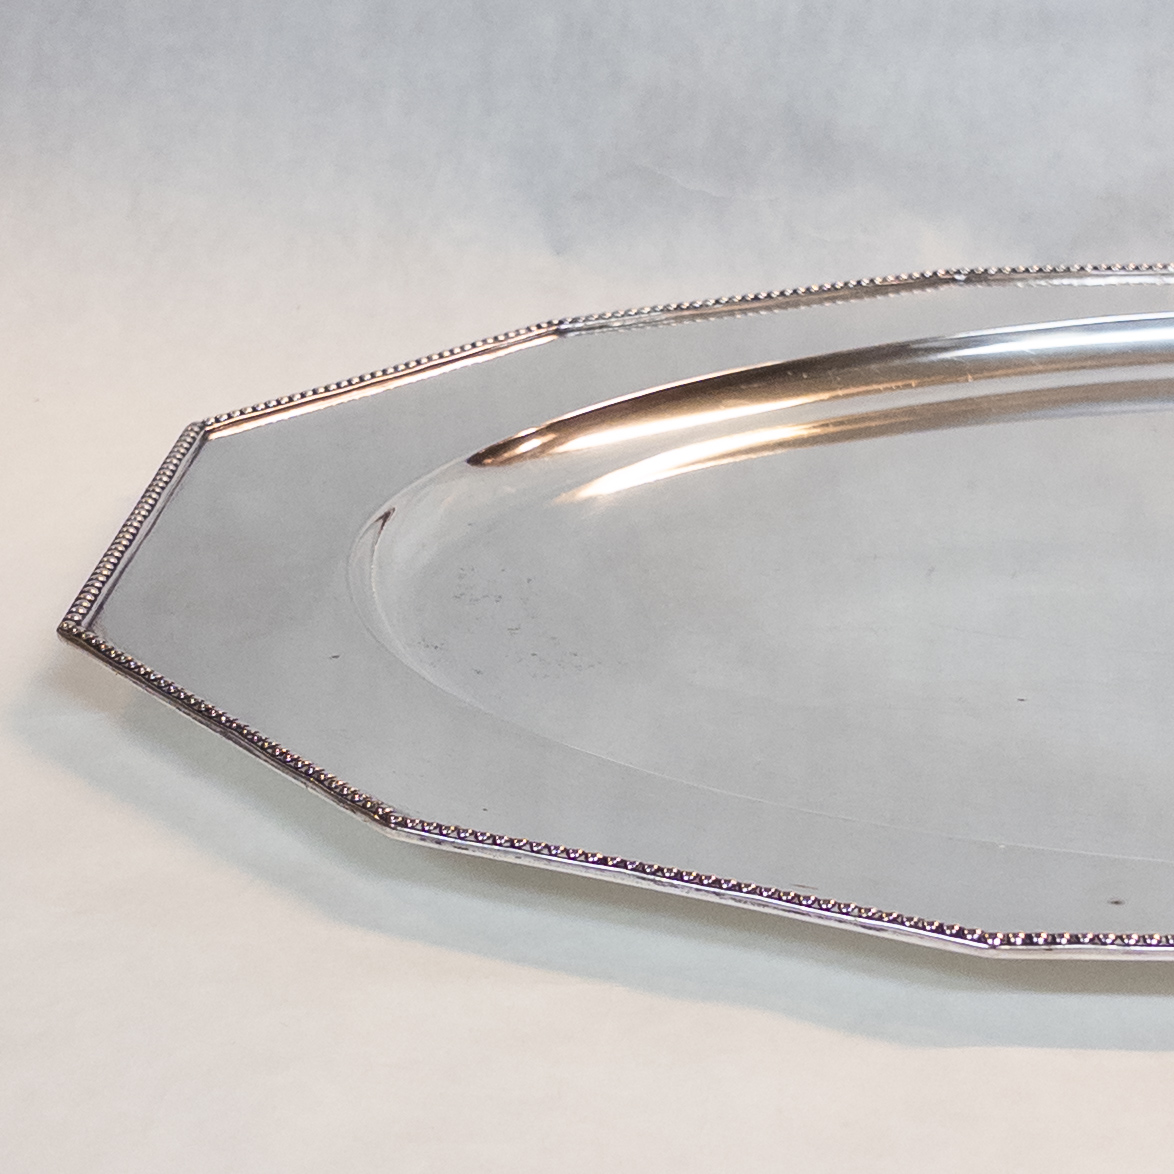 800 Silver Large Serving Tray